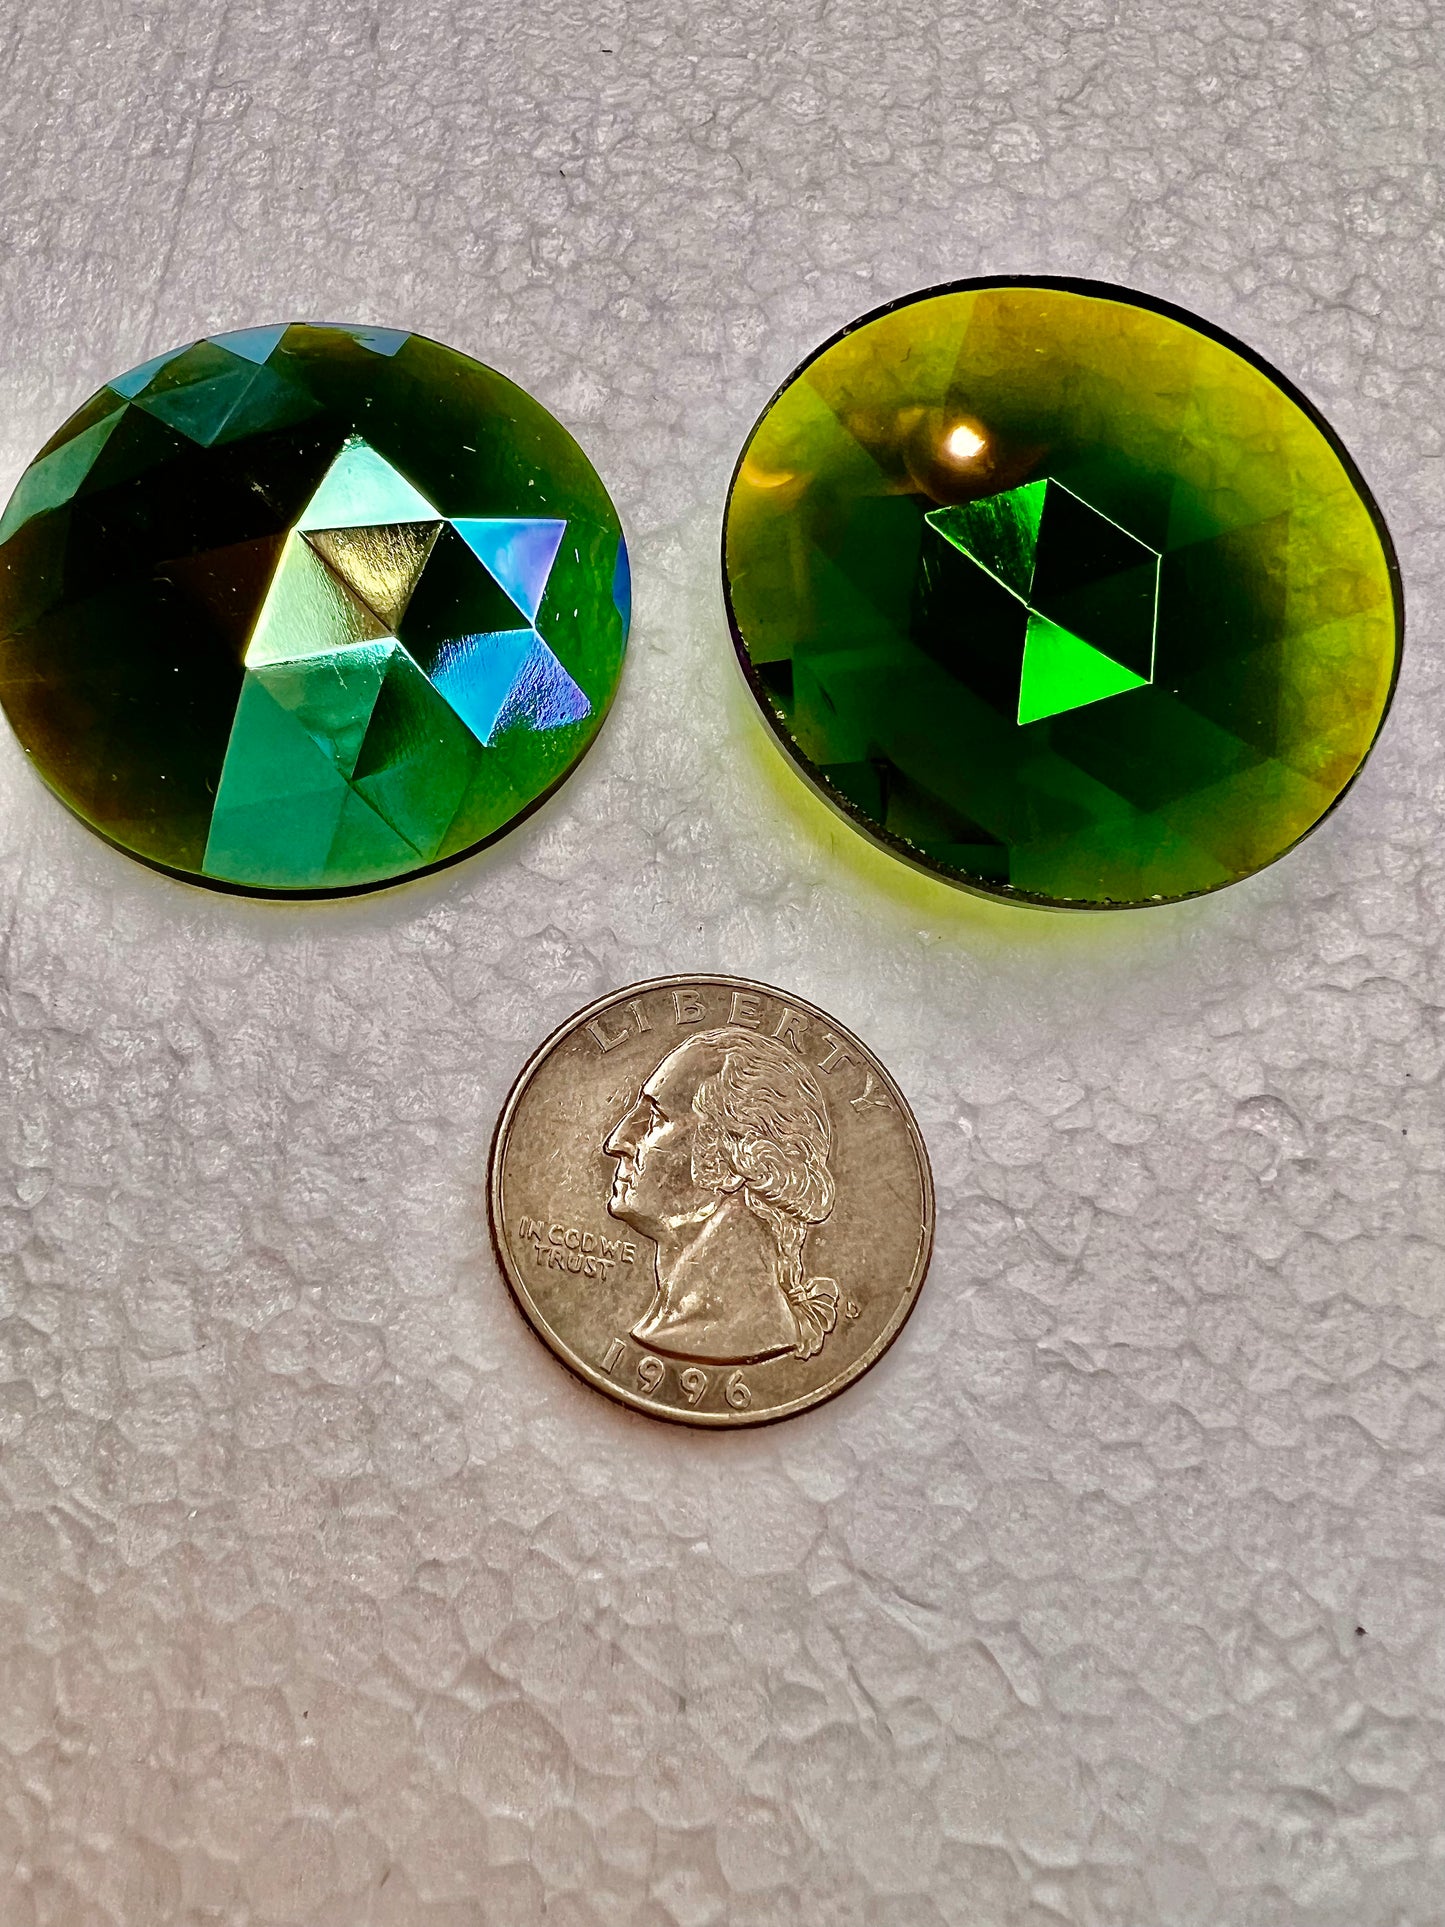 40mm Jewel- Round Faceted Trichroic Irid - In Stock to Quickly Ship